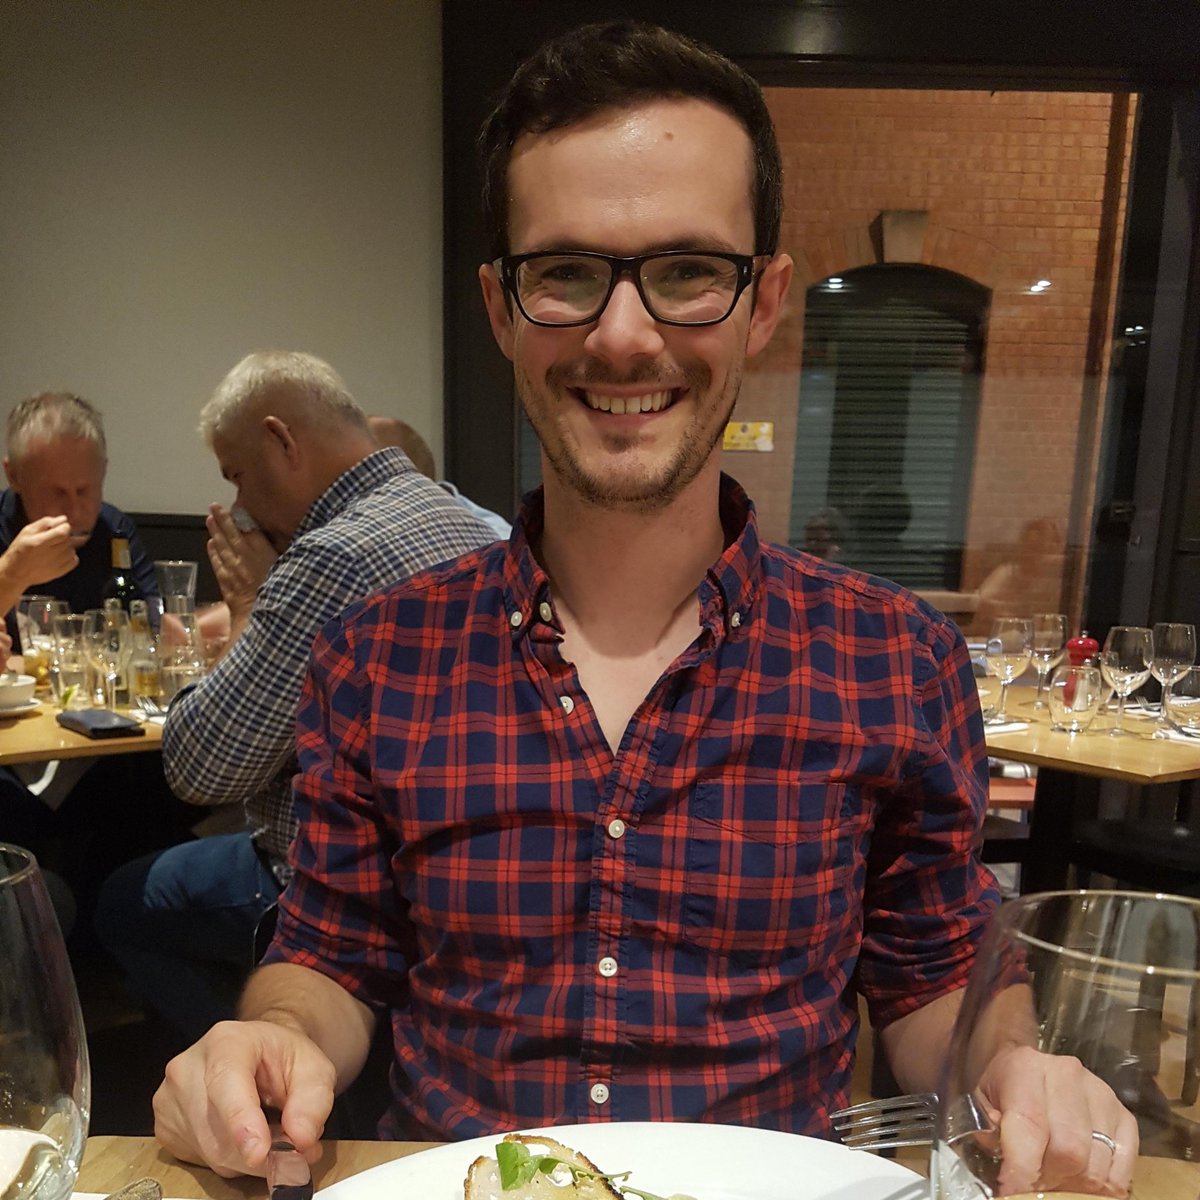 Dr Rhys Clyburn, Consultant Aneurin Bevan University Health Board, Wales  Trainee handbook leadInterests: Obstetrics , Airway, Mentoring Non-work: piano  , dogs  , food, family  @y_gas_man